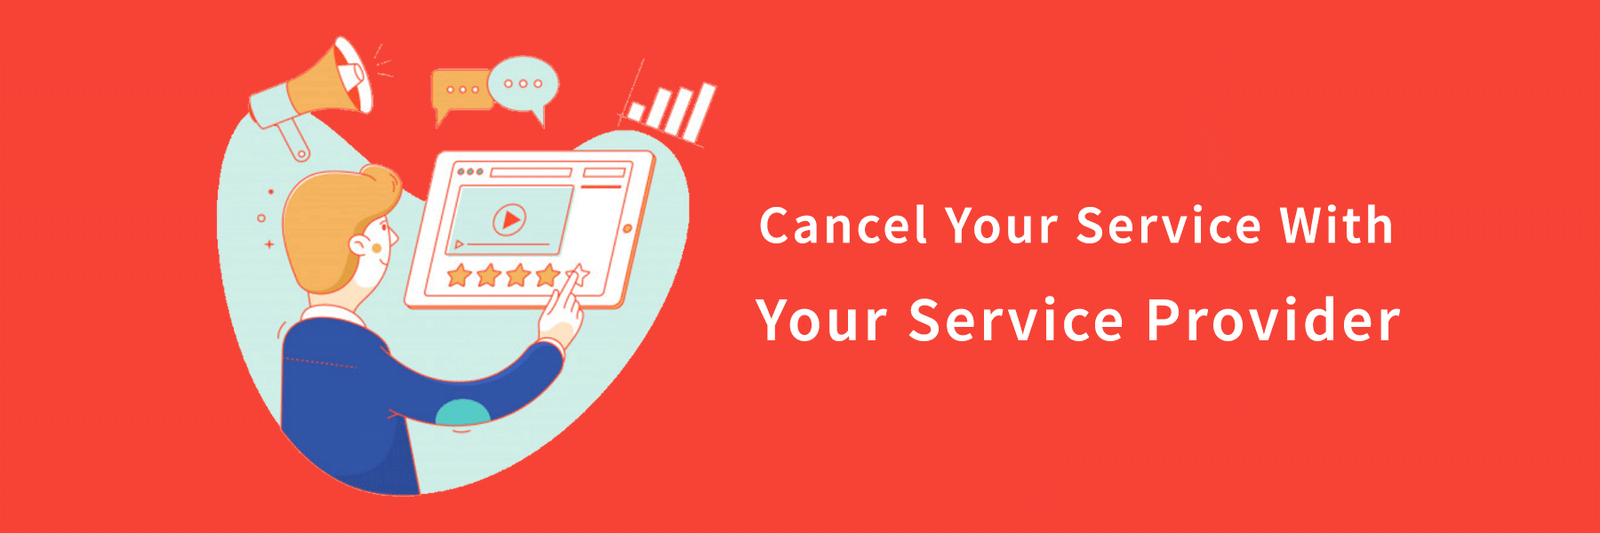 Professional Advisor - Know How To Cancel Anything - HowTo-Cancel